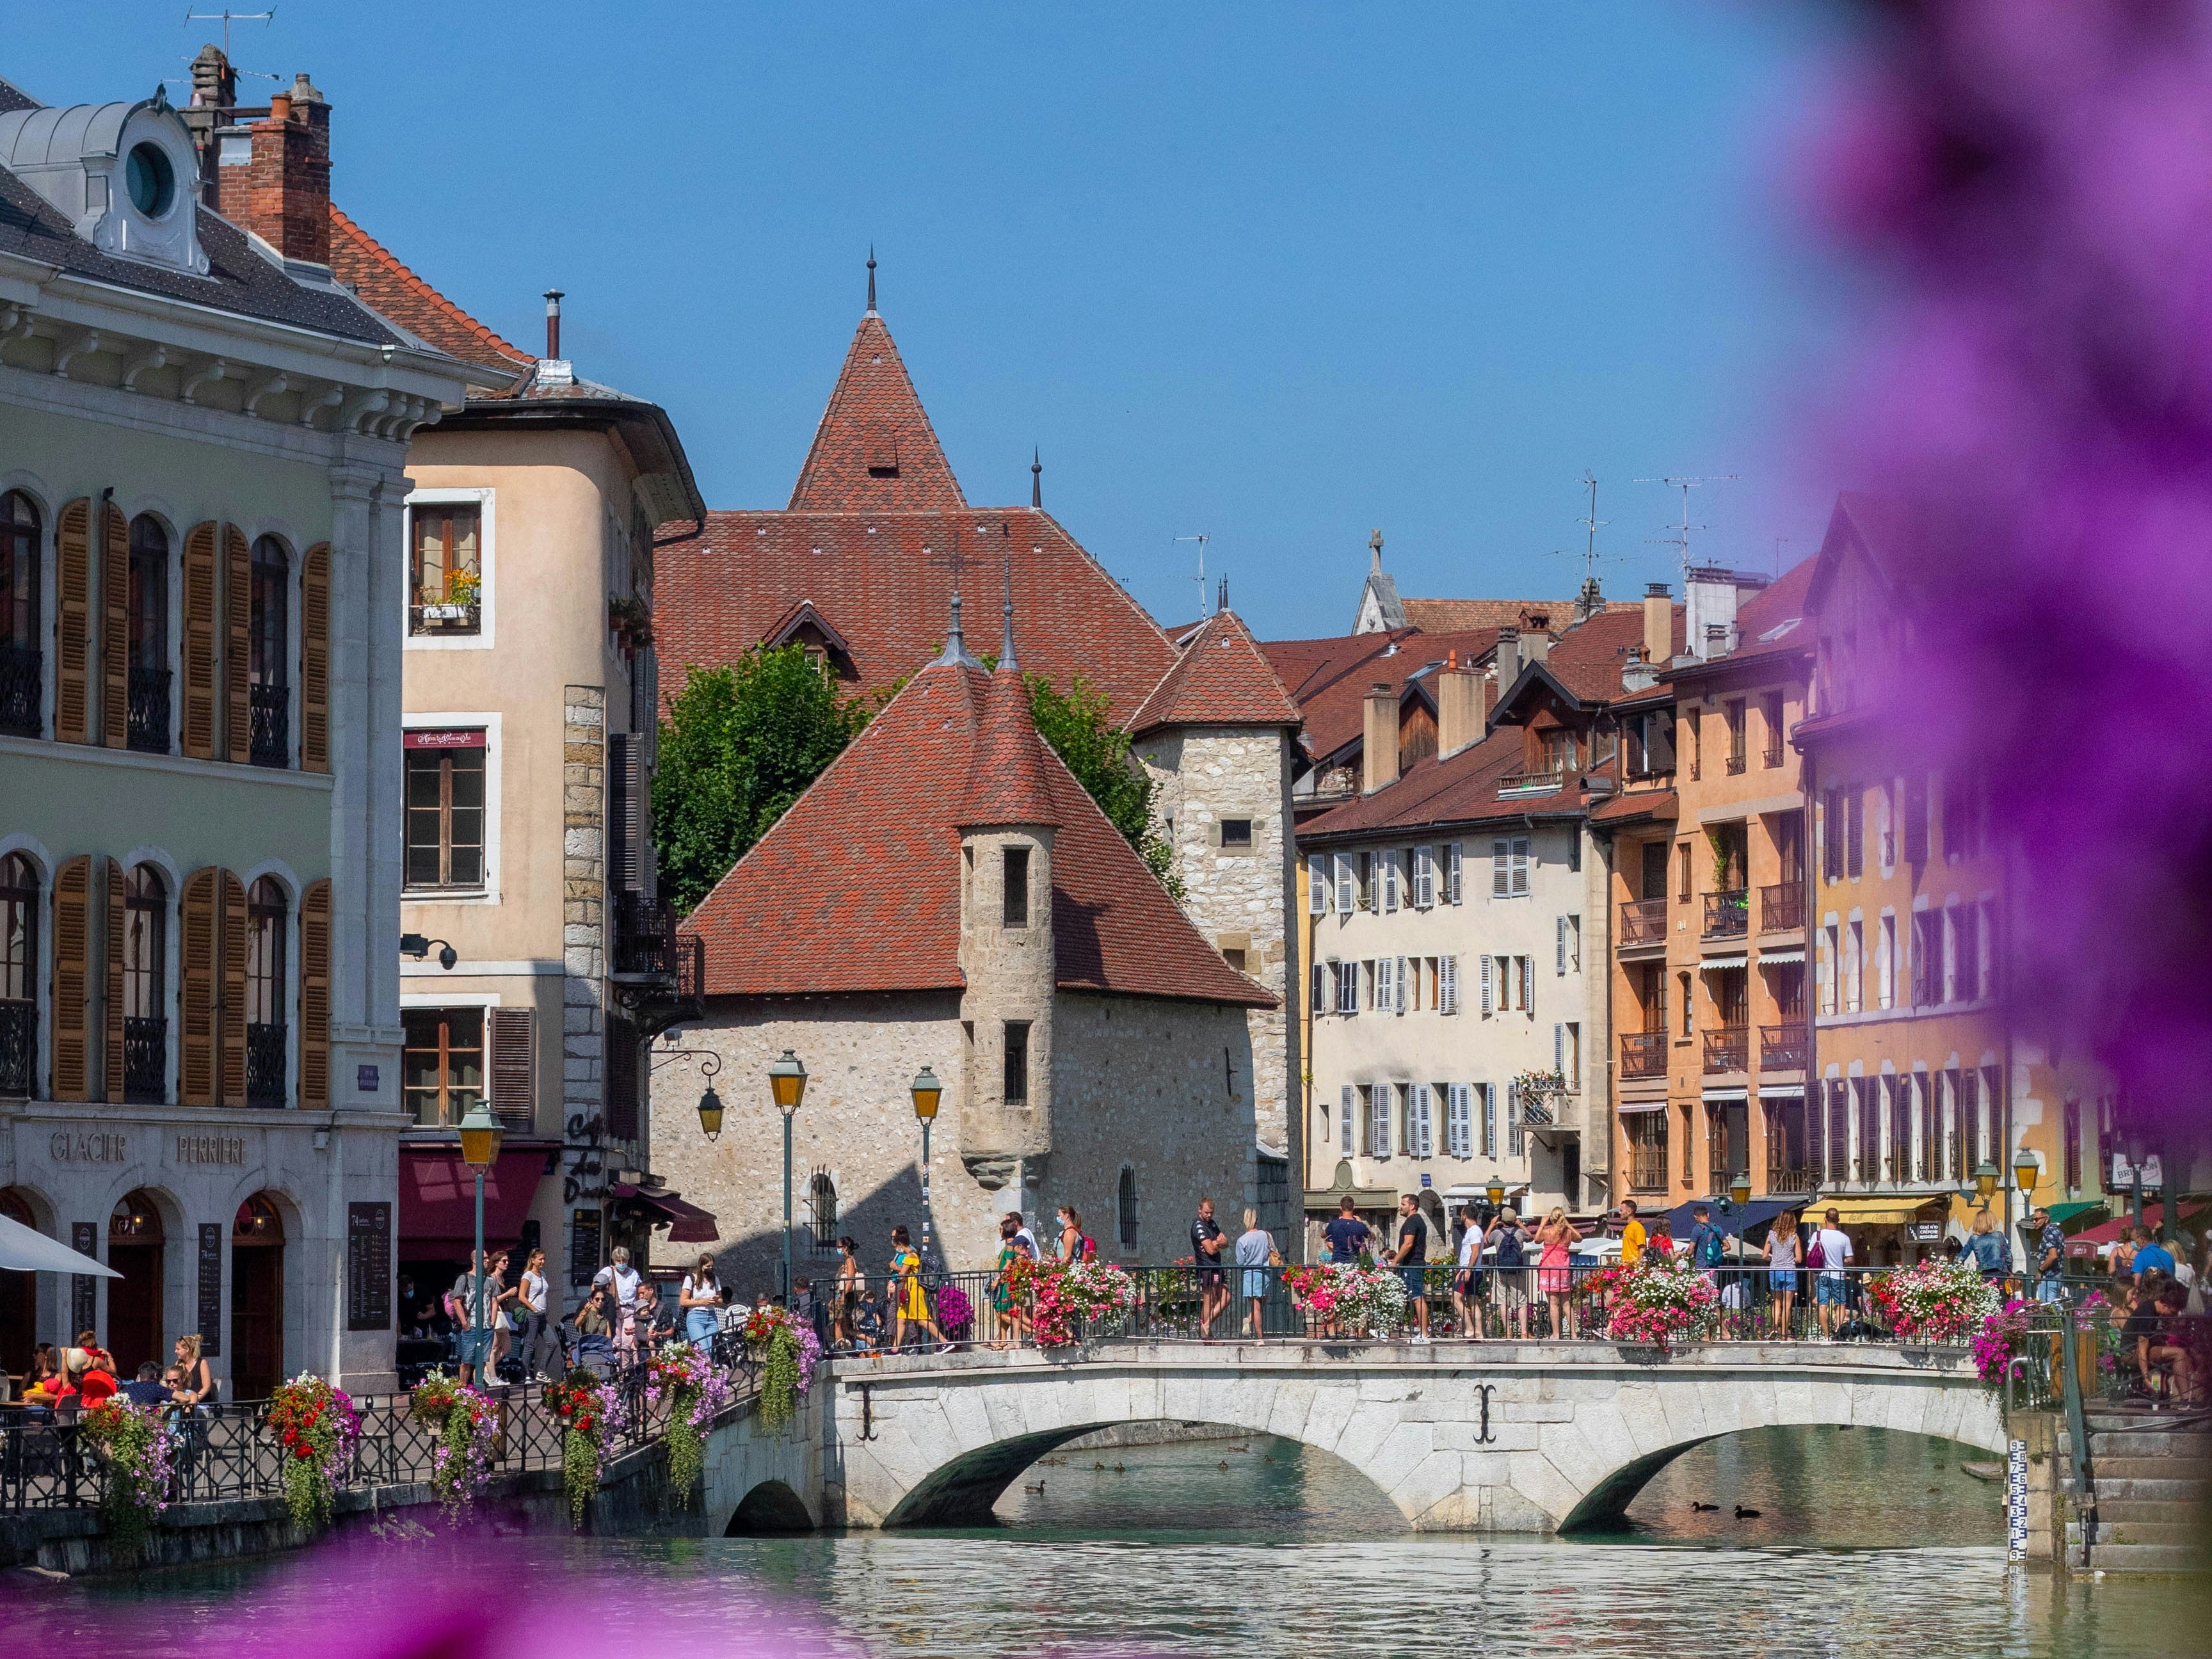 Whimsical Annecy, the Venice of the French Alps